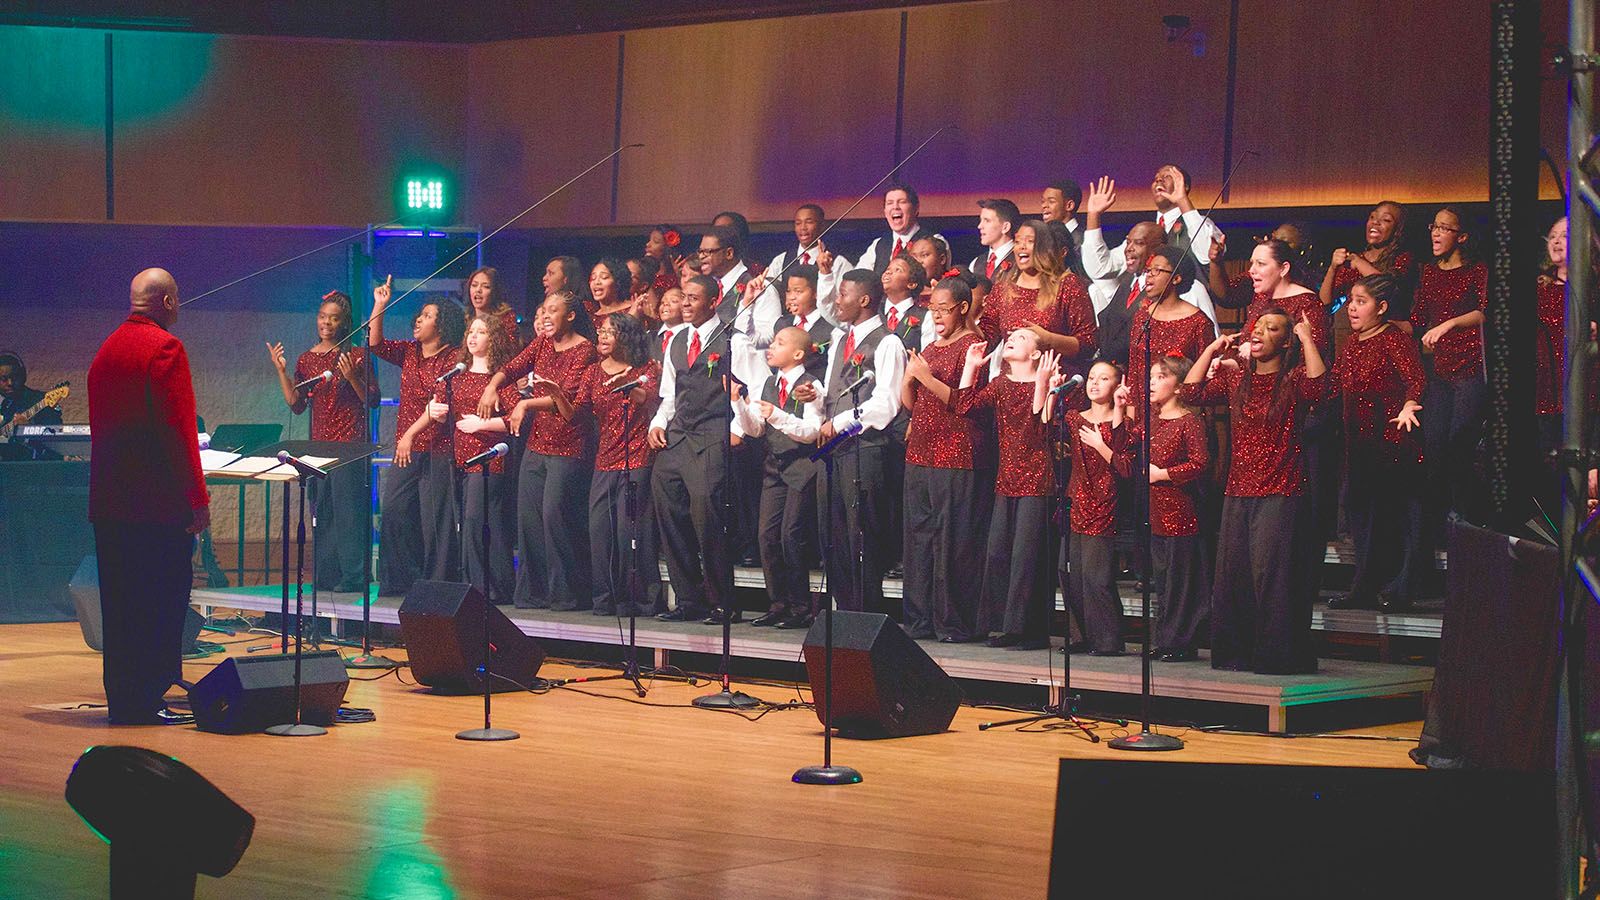 Registration runs through Oct. 31 for the Voices of Unity Youth Choir.